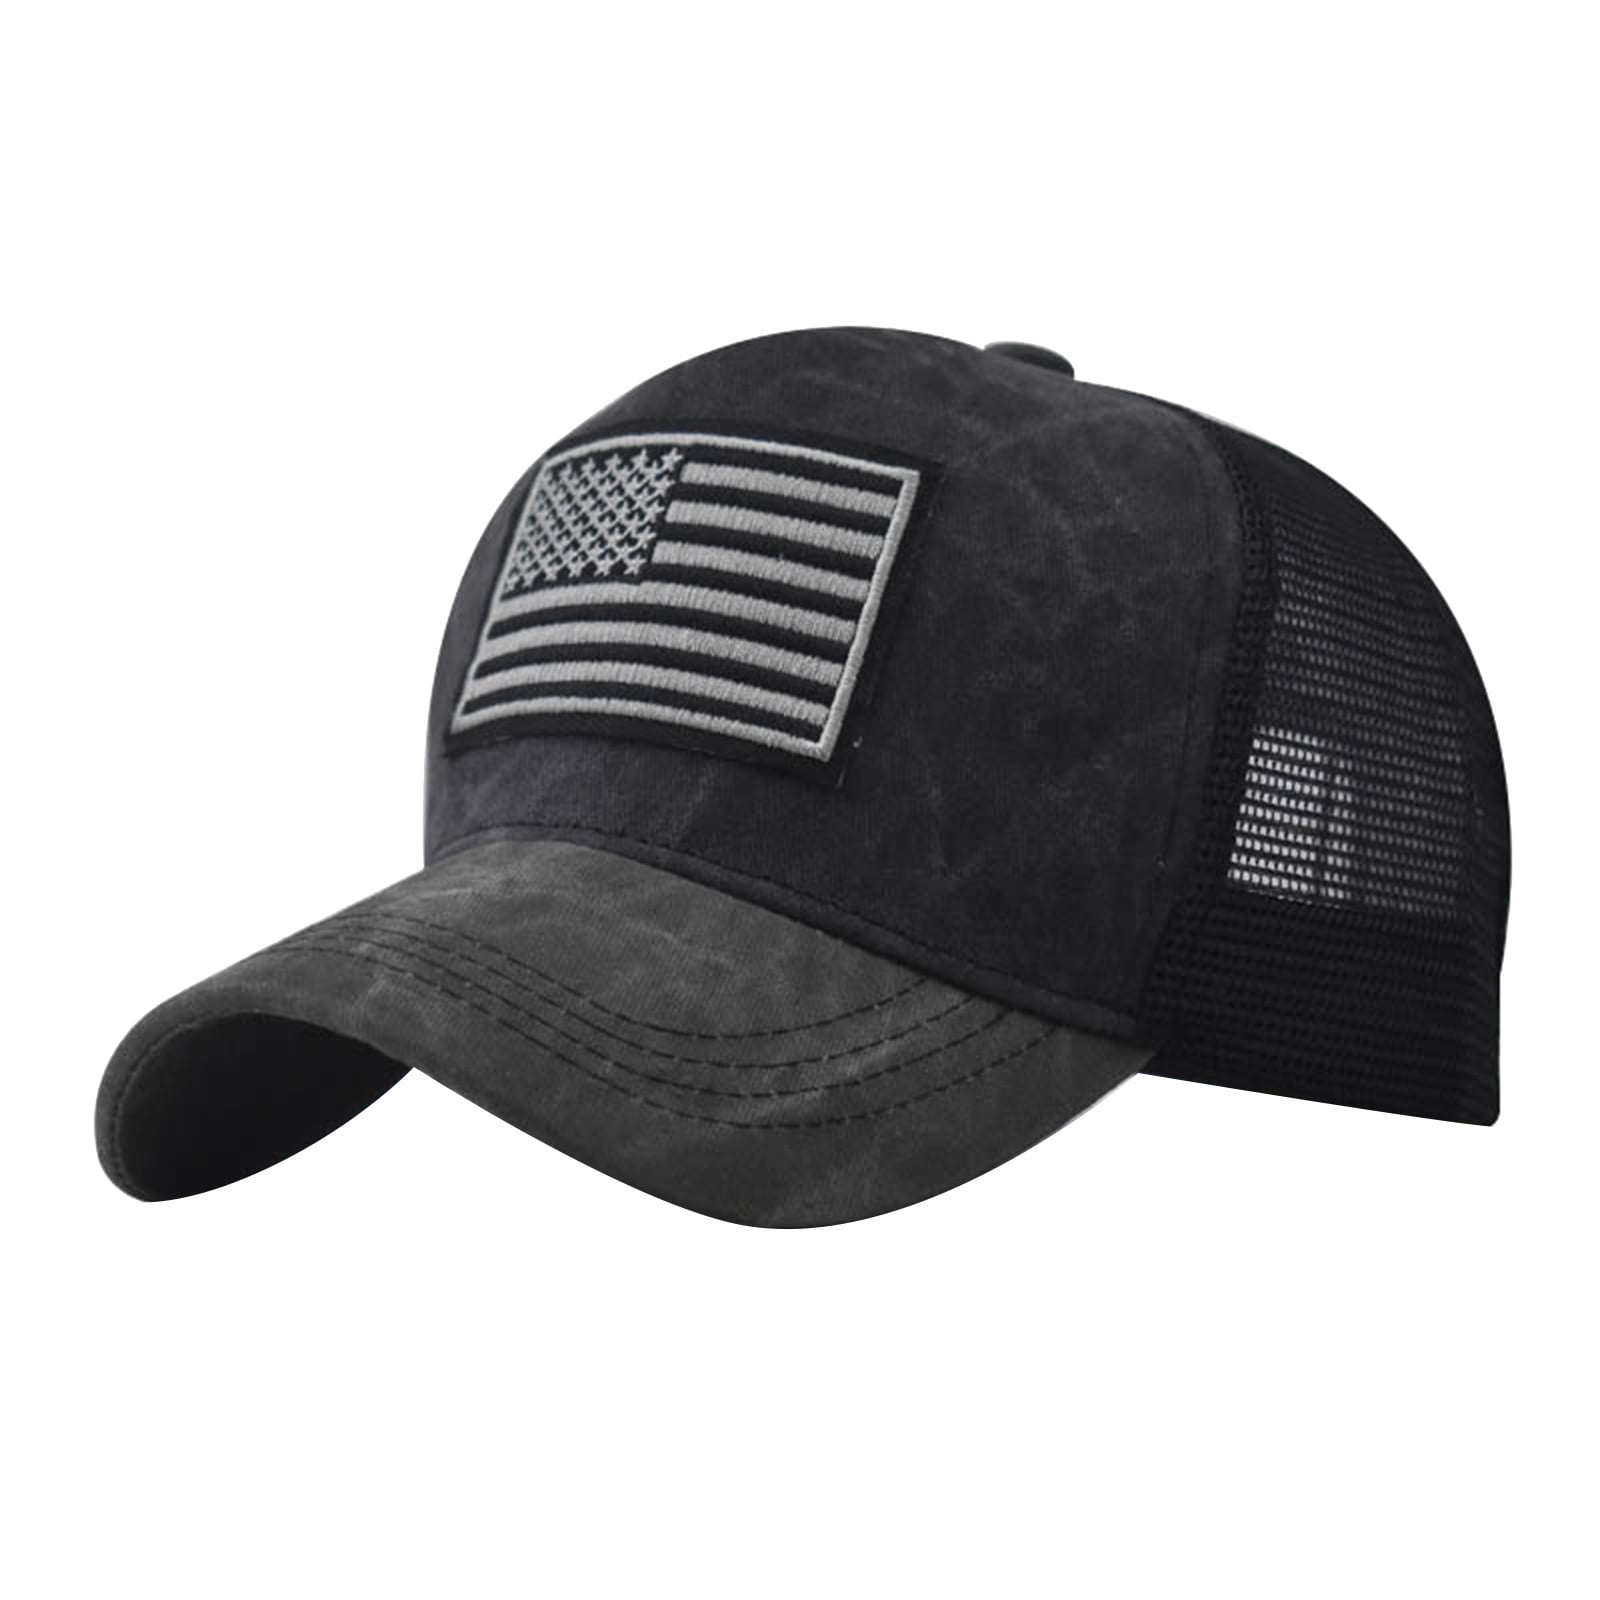 Vintage Trucker Hats for Men American Flag Patch Breathable Mesh